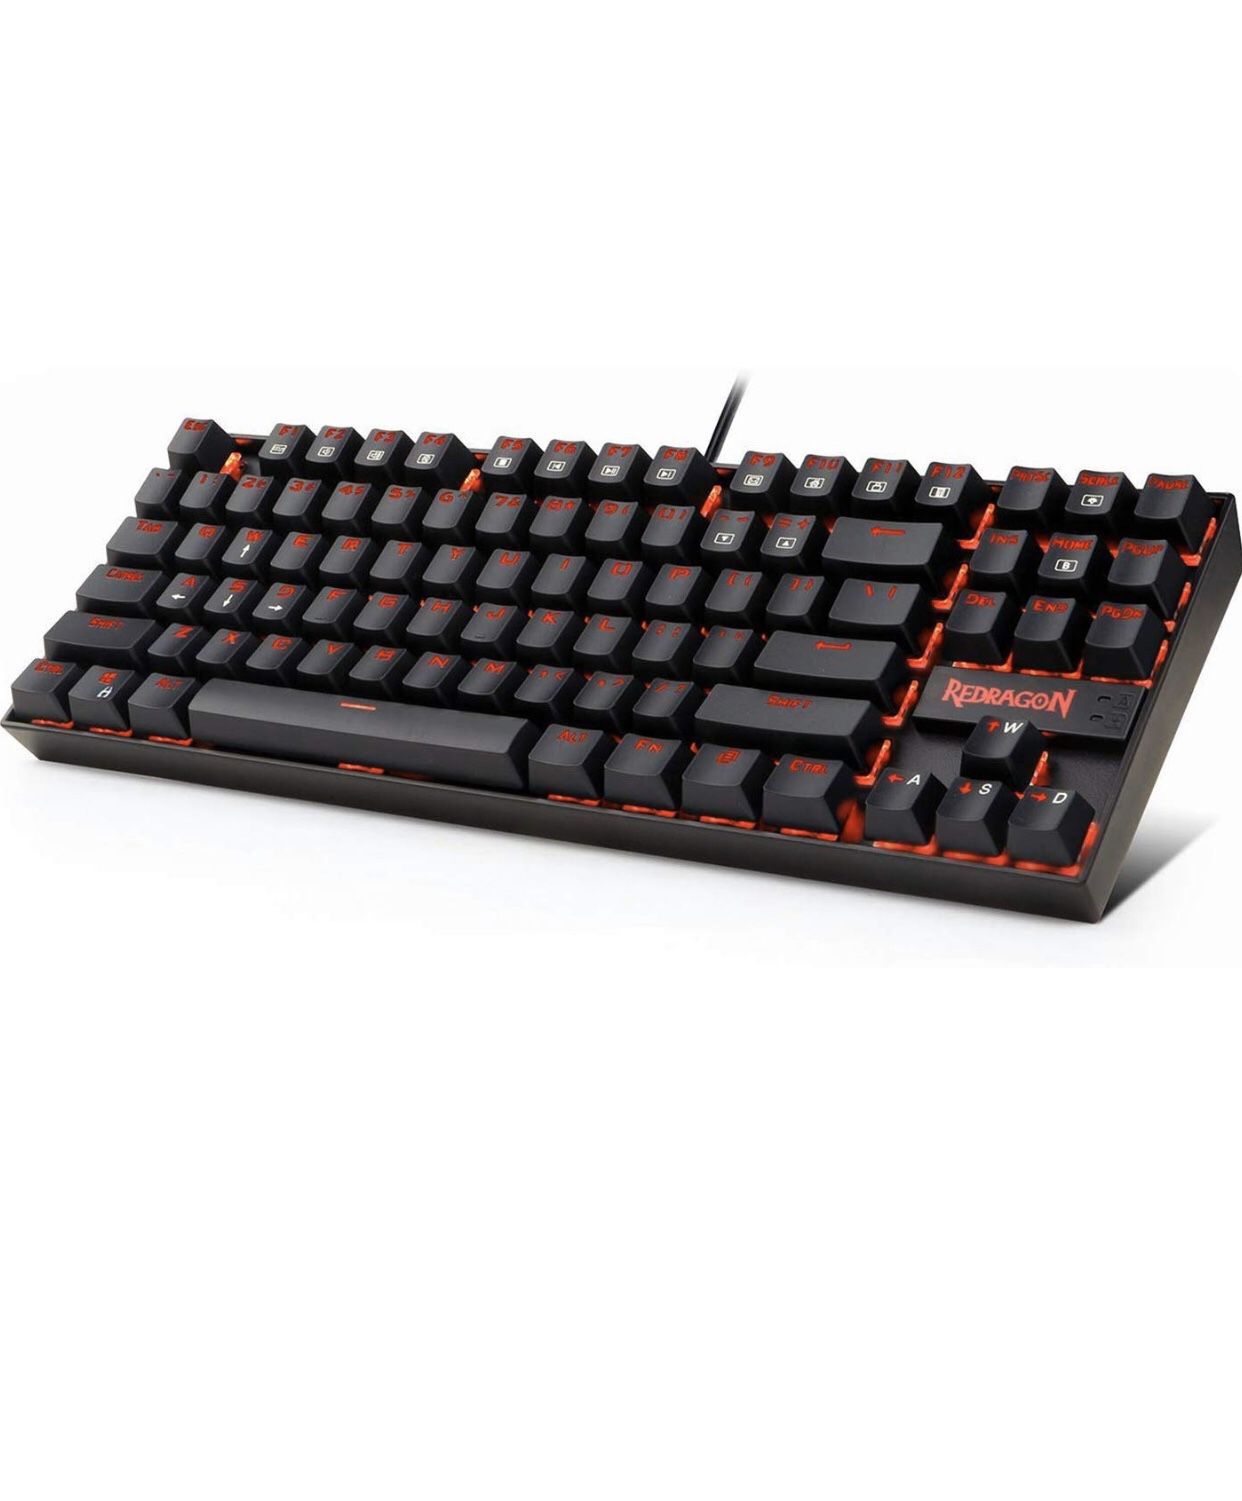 Redragon K552 60% Mechanical Gaming Keyboard Compact 87 Key Mechanical Computer Keyboard KUMARA USB Wired Cherry MX Blue Equivalent Switches for Wind